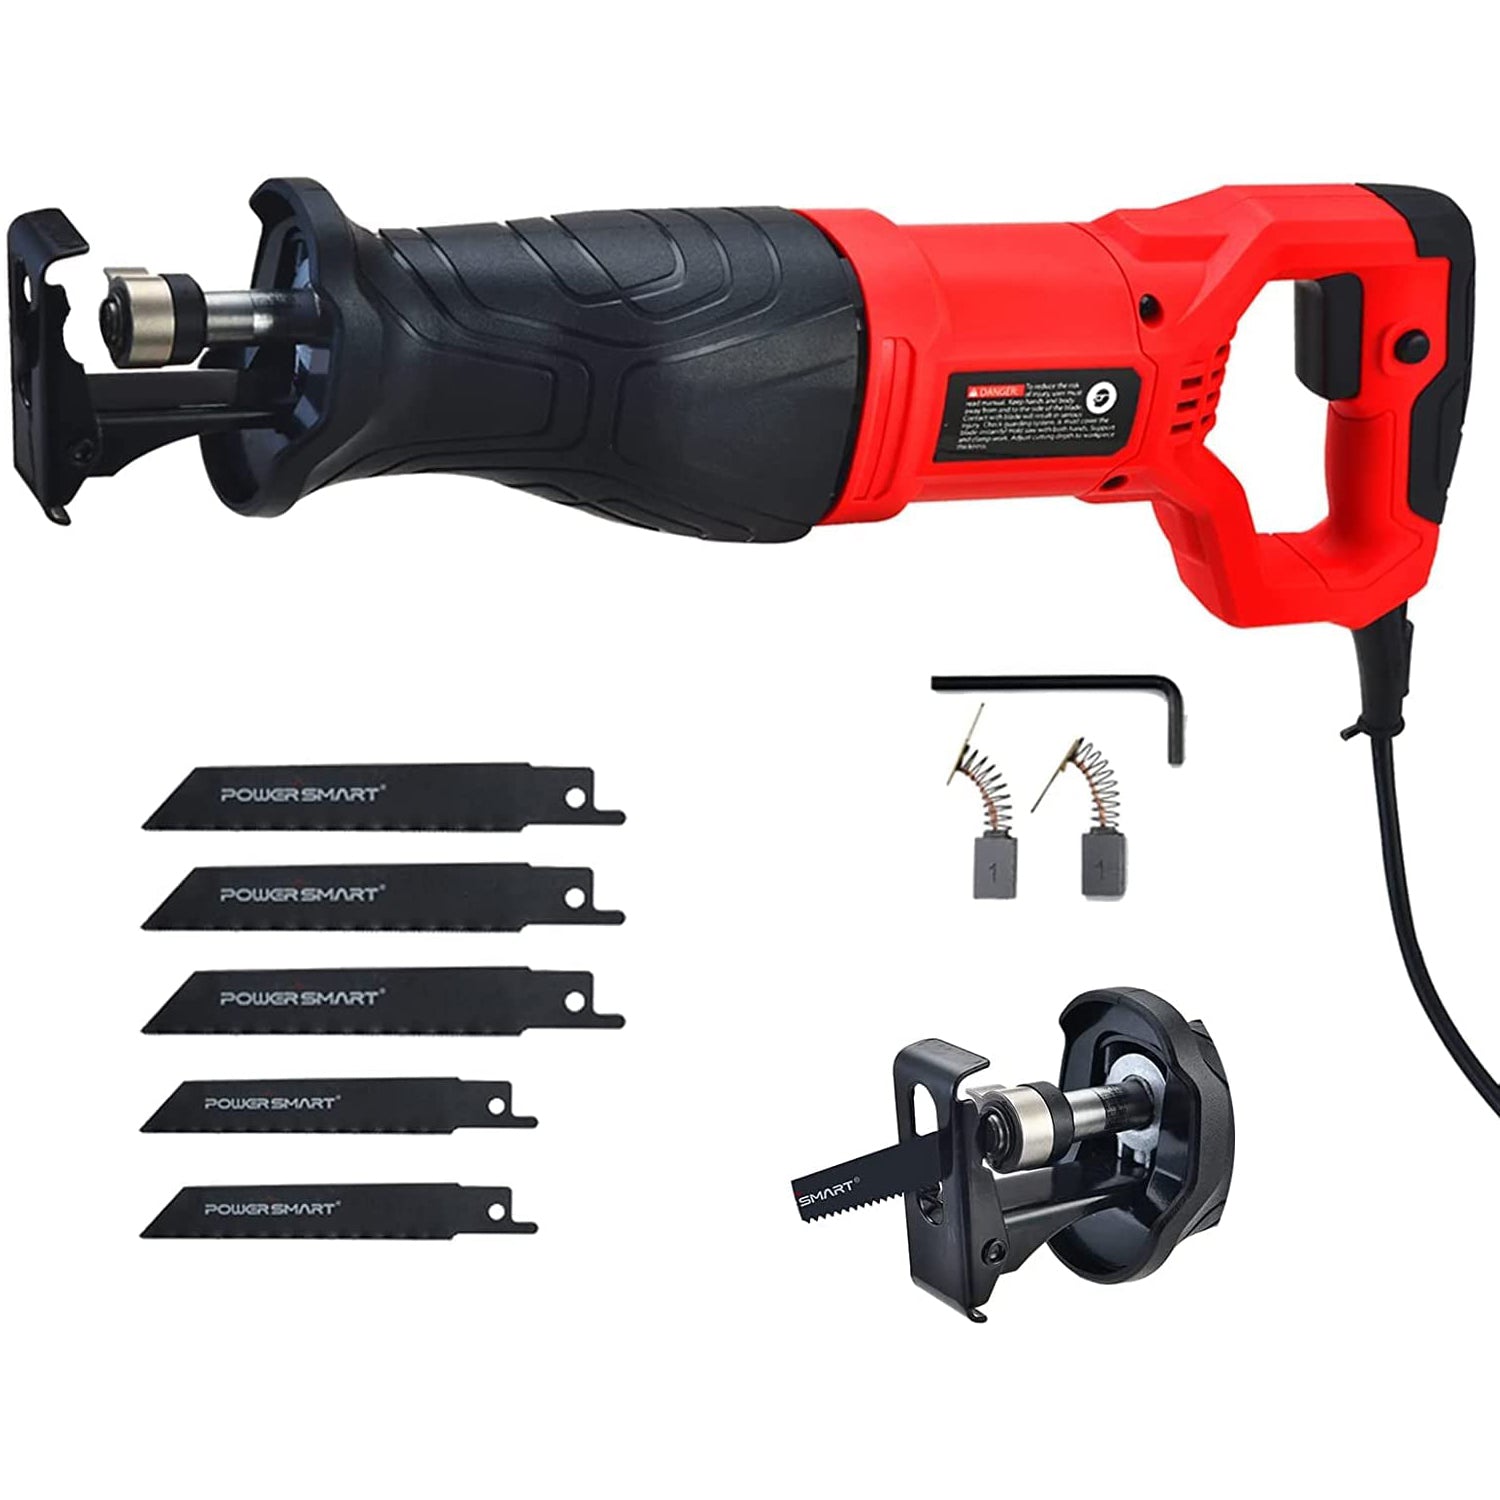 Reciprocating Saw - 7.5 Amp No-load Speed 2800SPM Reciprocating Saw Corded, Electric Hand Saw Sawzall PS4010-HW